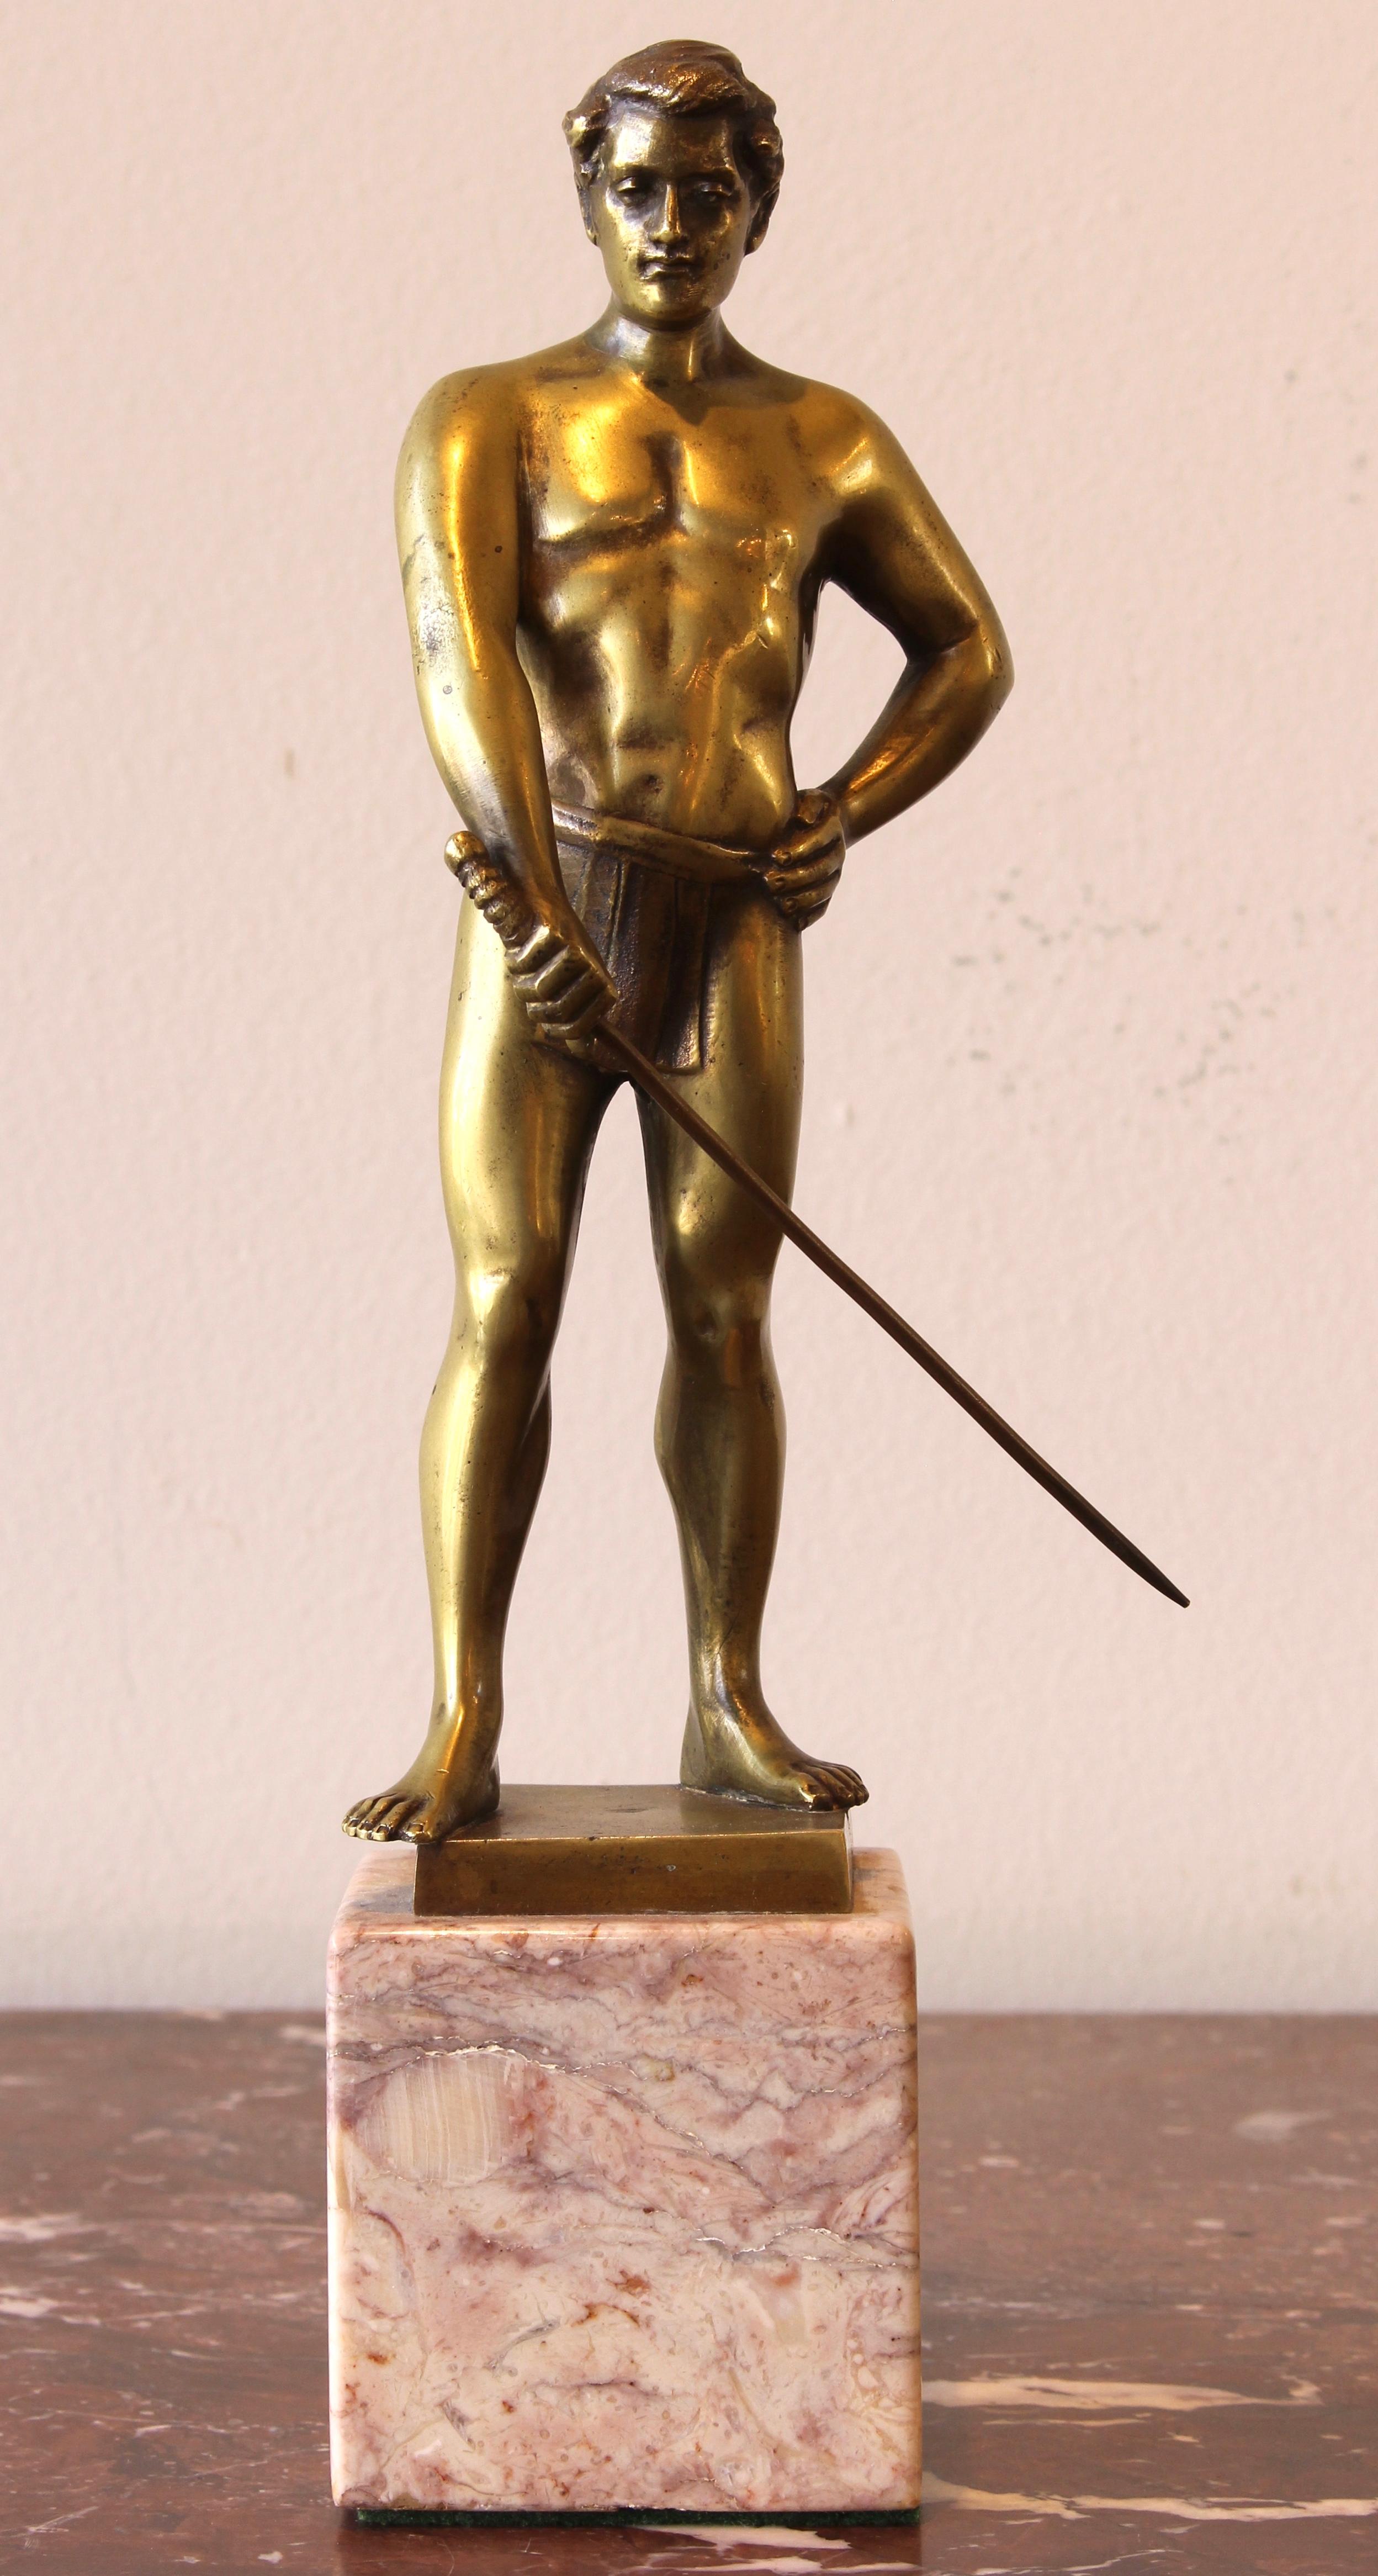 A small cast bronze sculpture of a fencer by Franz Iffland, 1862-1935, on rose marble base.